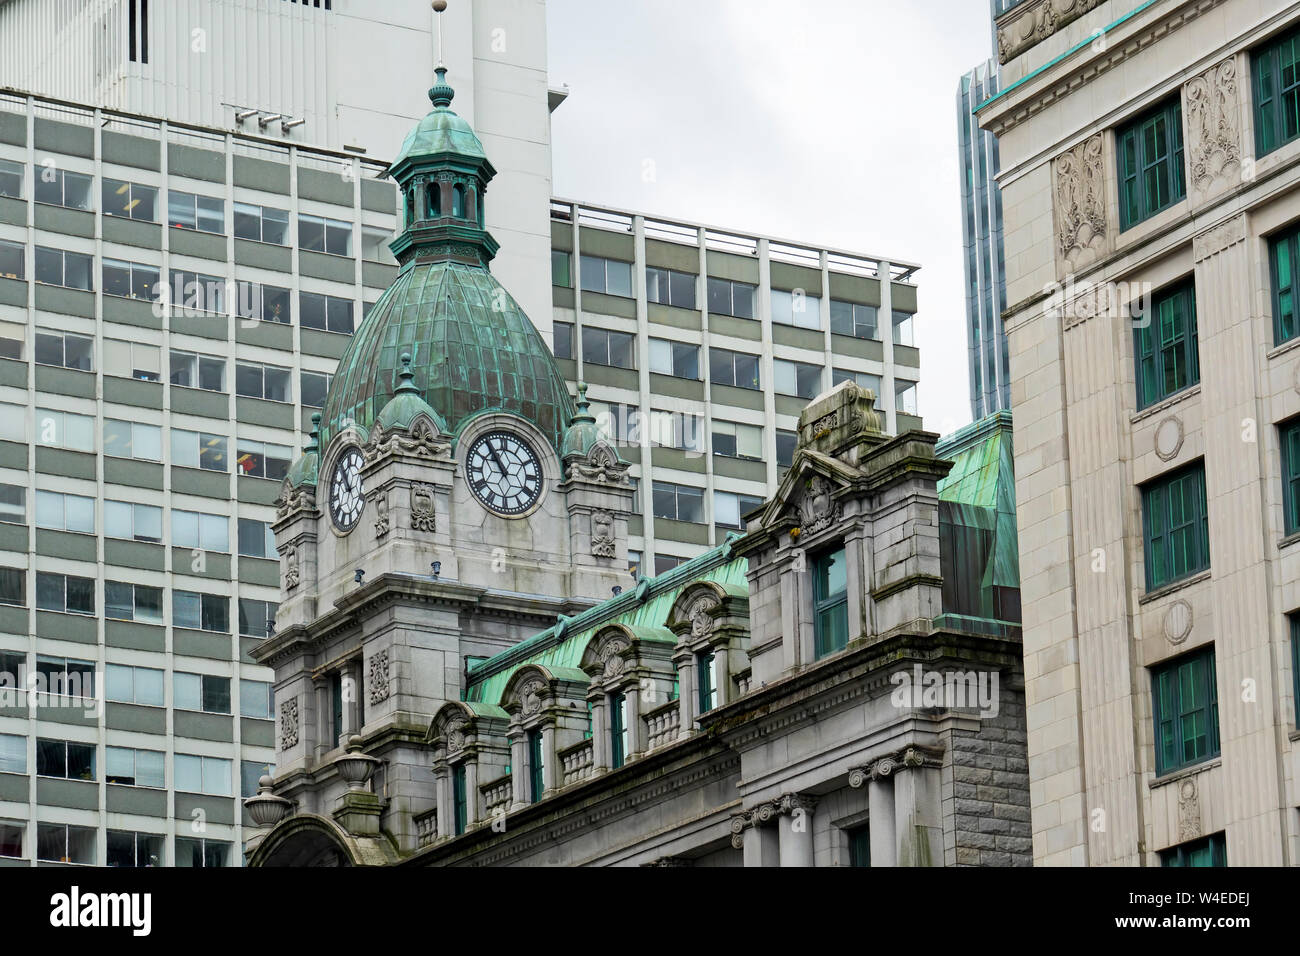 The dome clock tower at Sinclair Centre at Granville and Hastings streets in Vancouver, British Columbia, Canada. Stock Photo